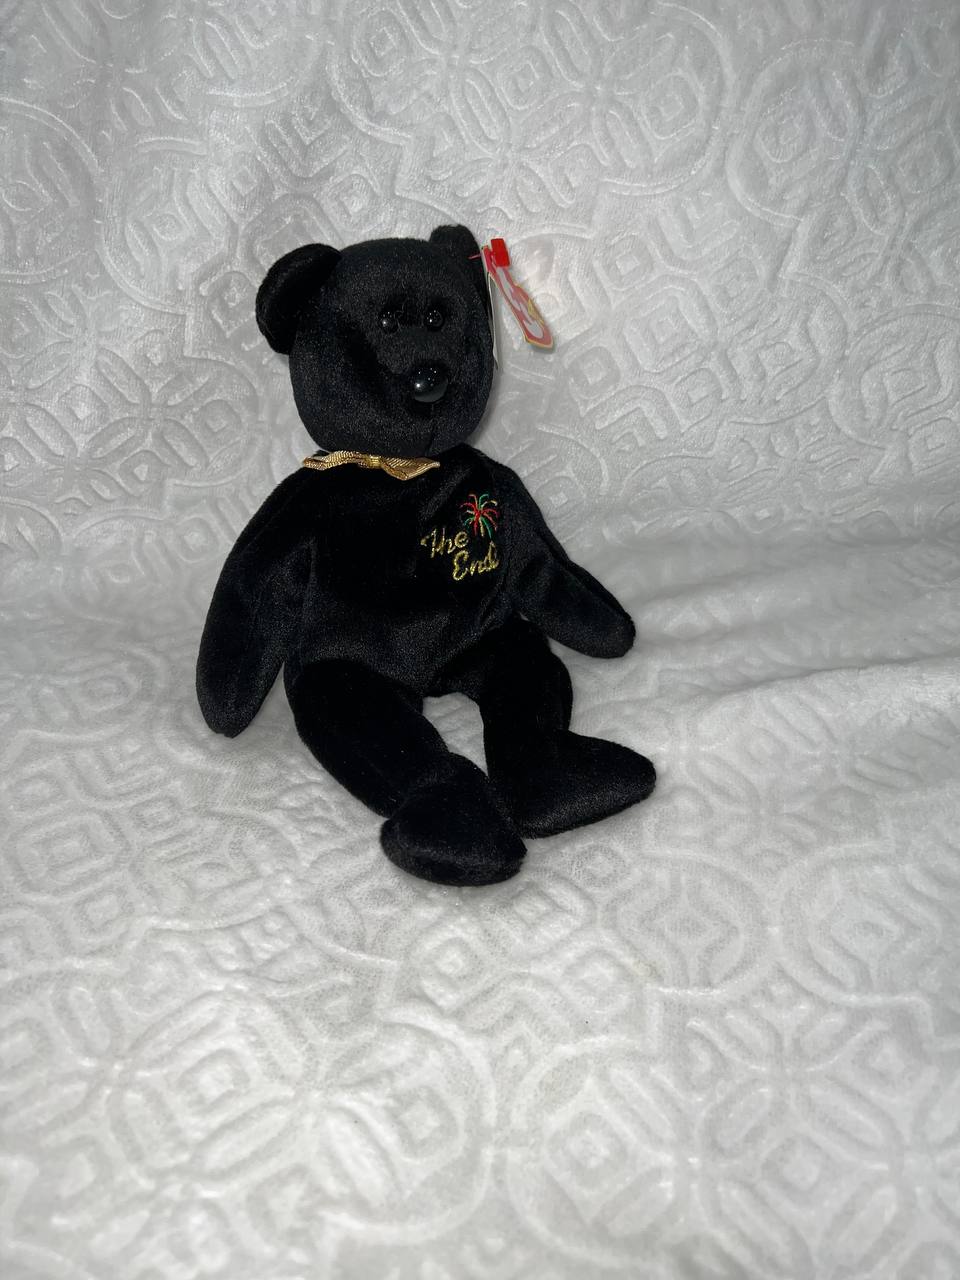 *RARE* MINT The End Beanie Baby 1999 With Tag